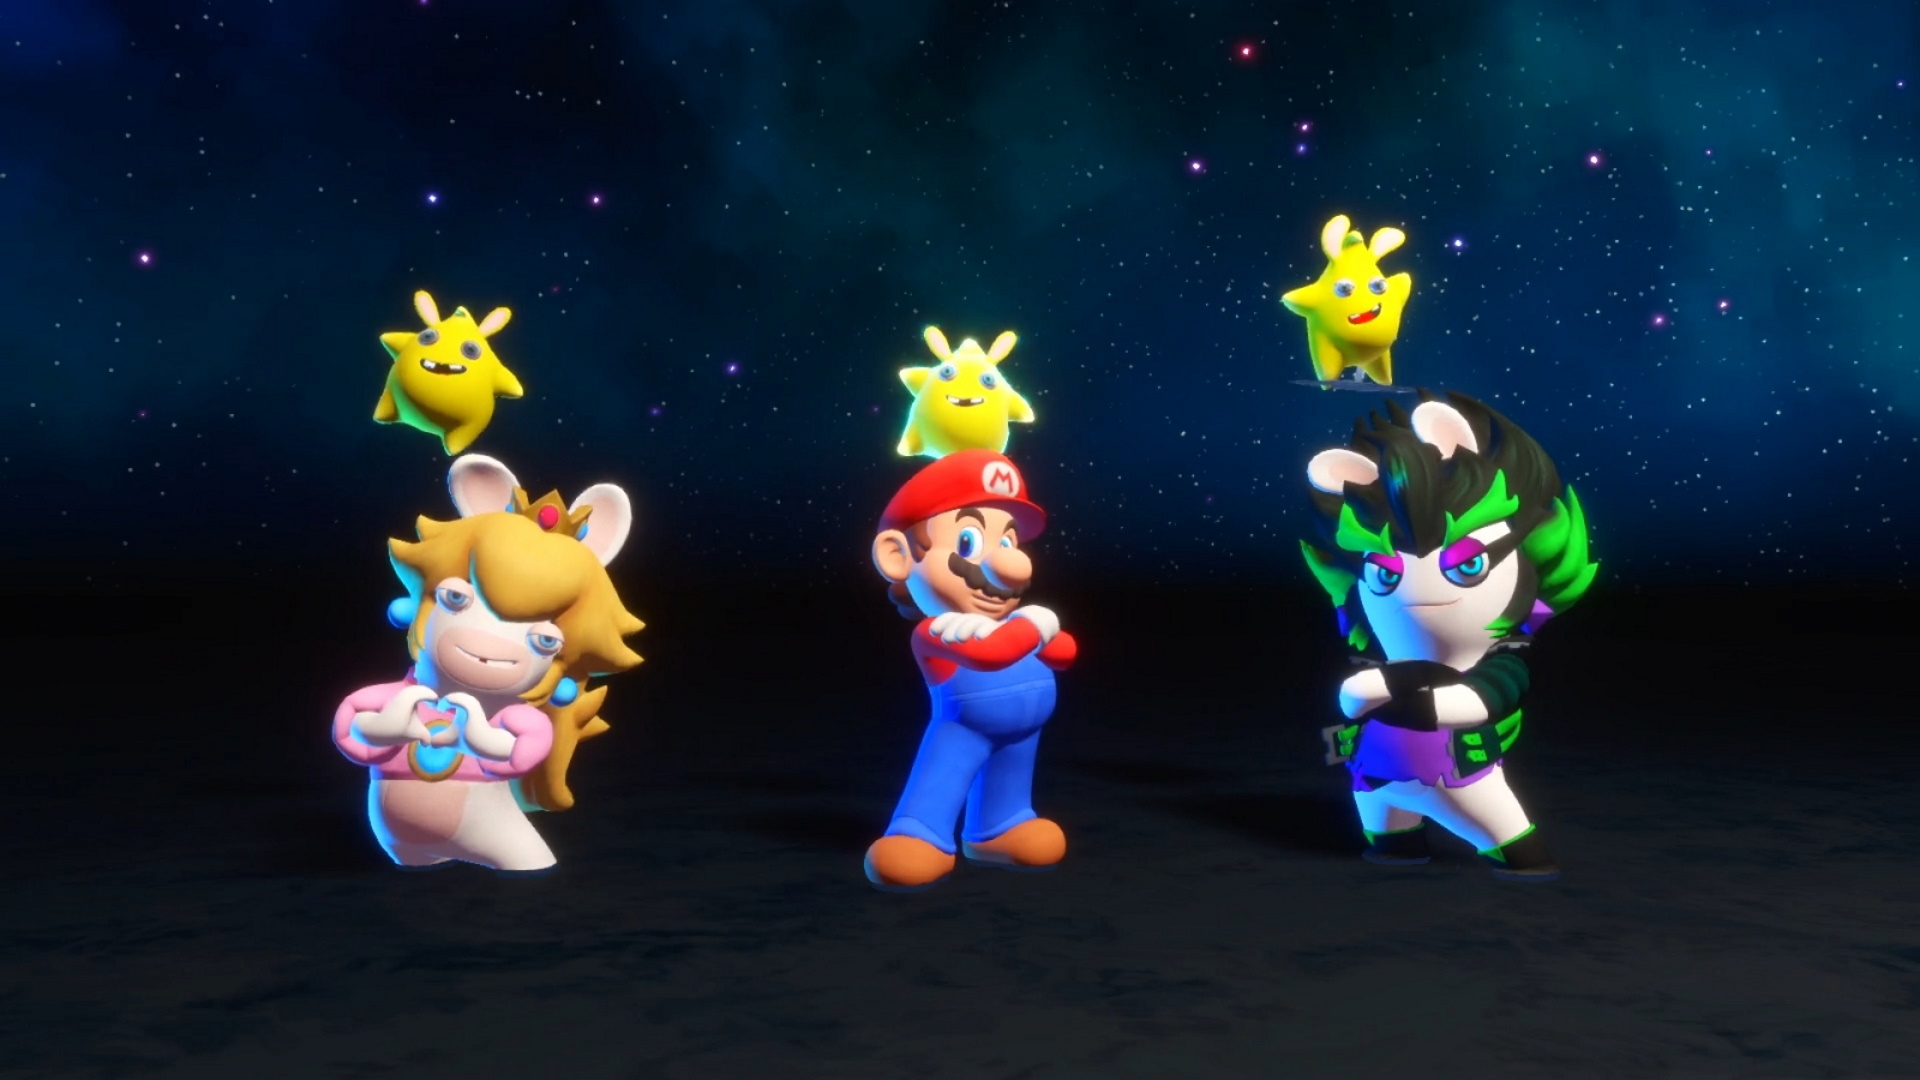 Mario + Rabbids Sparks Of Hope' release date, characters and